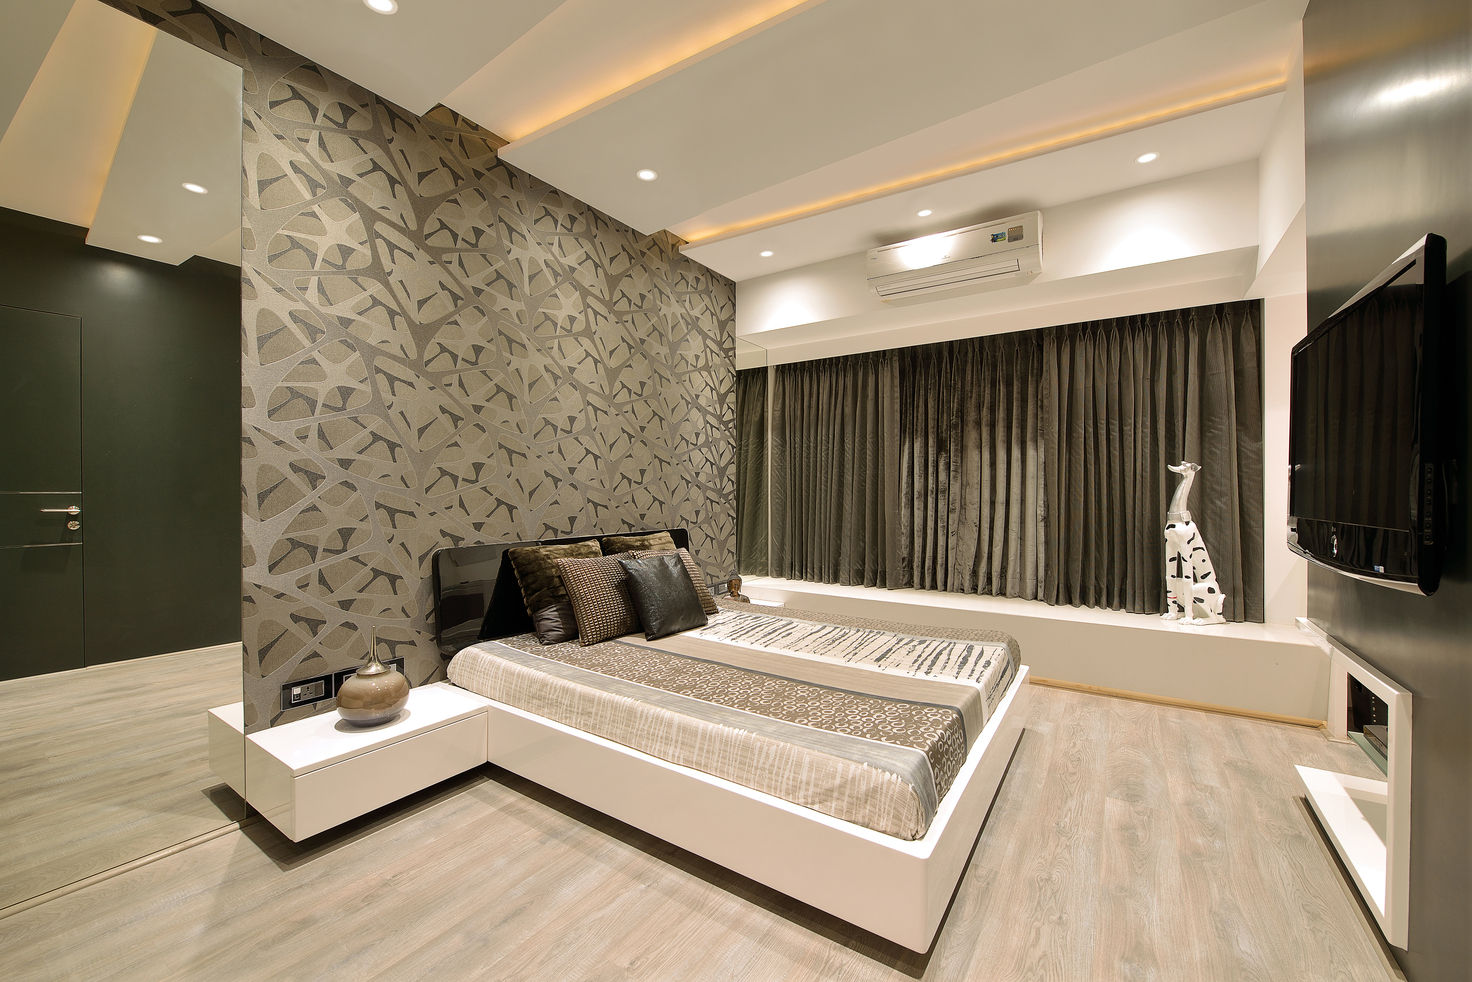 homify Chambre moderne